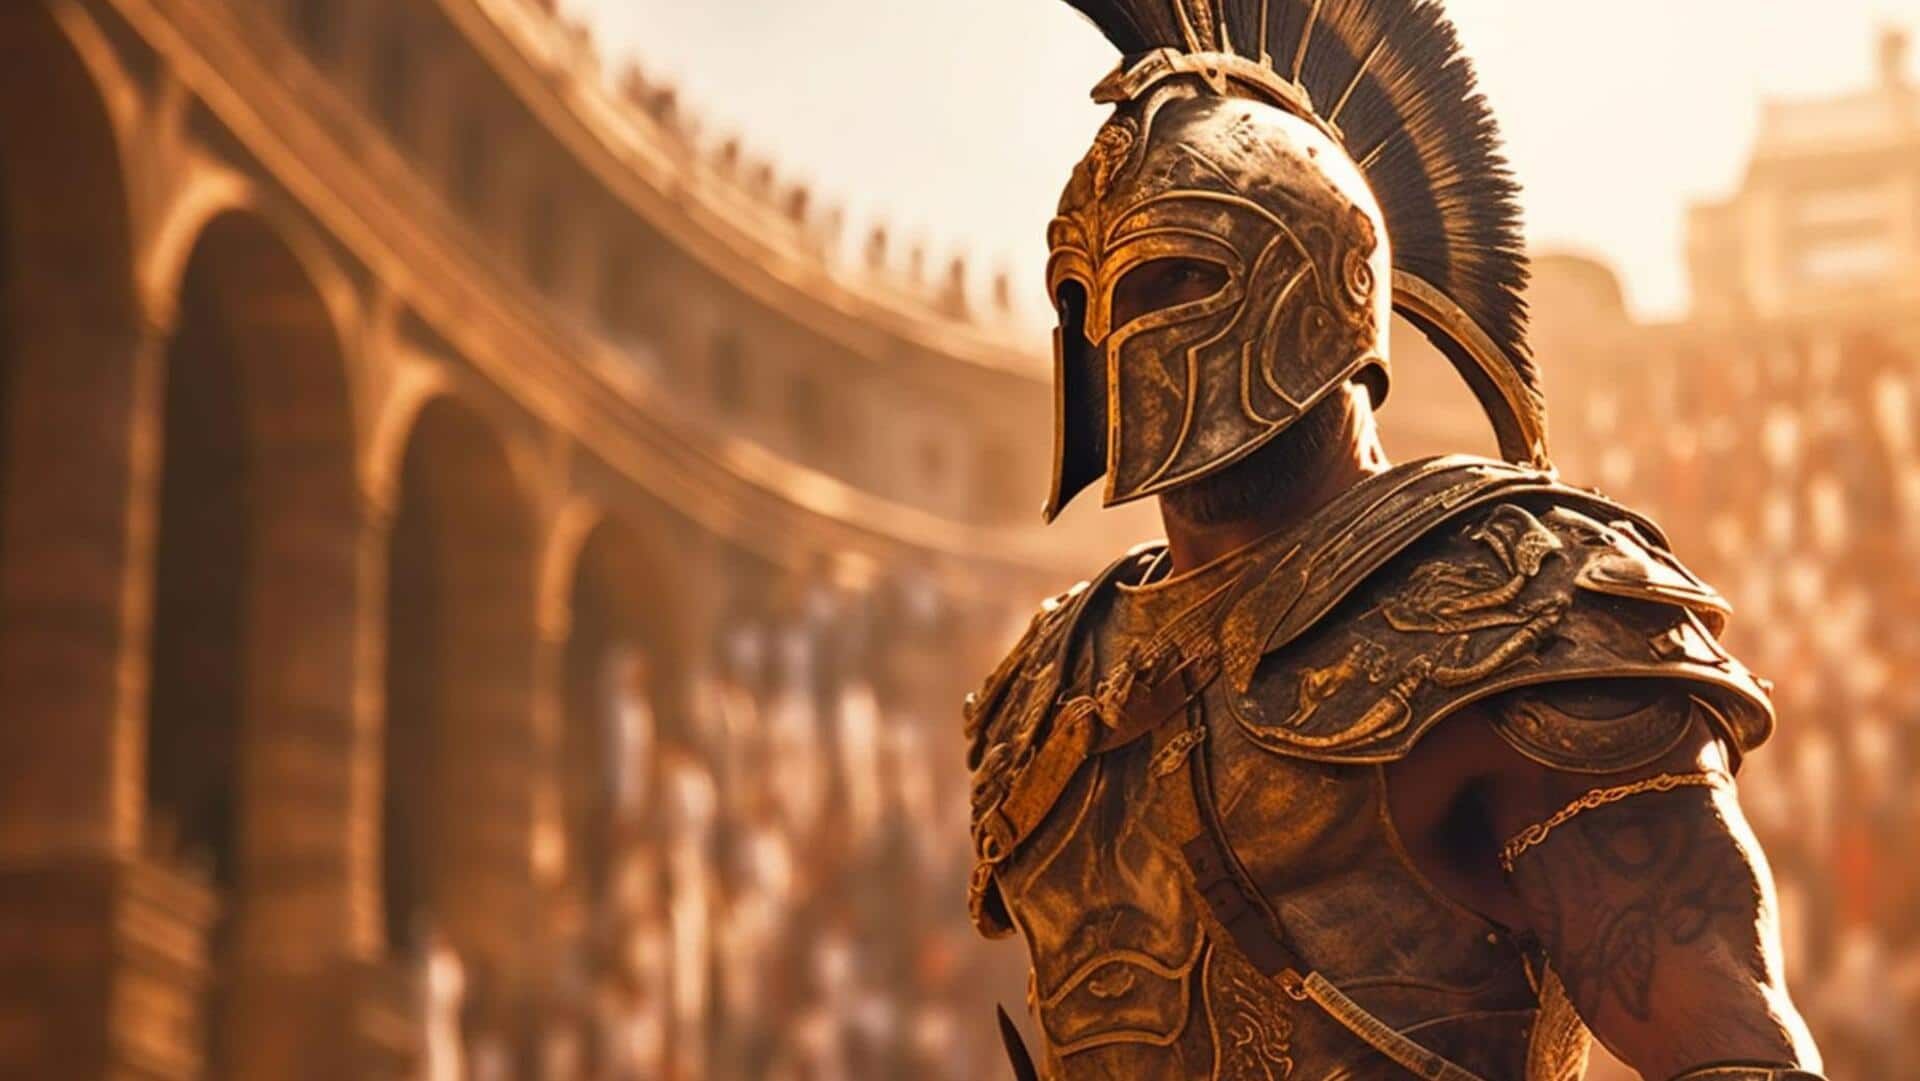 First look: 'Gladiator 2' official logo revealed ahead of CinemaCon